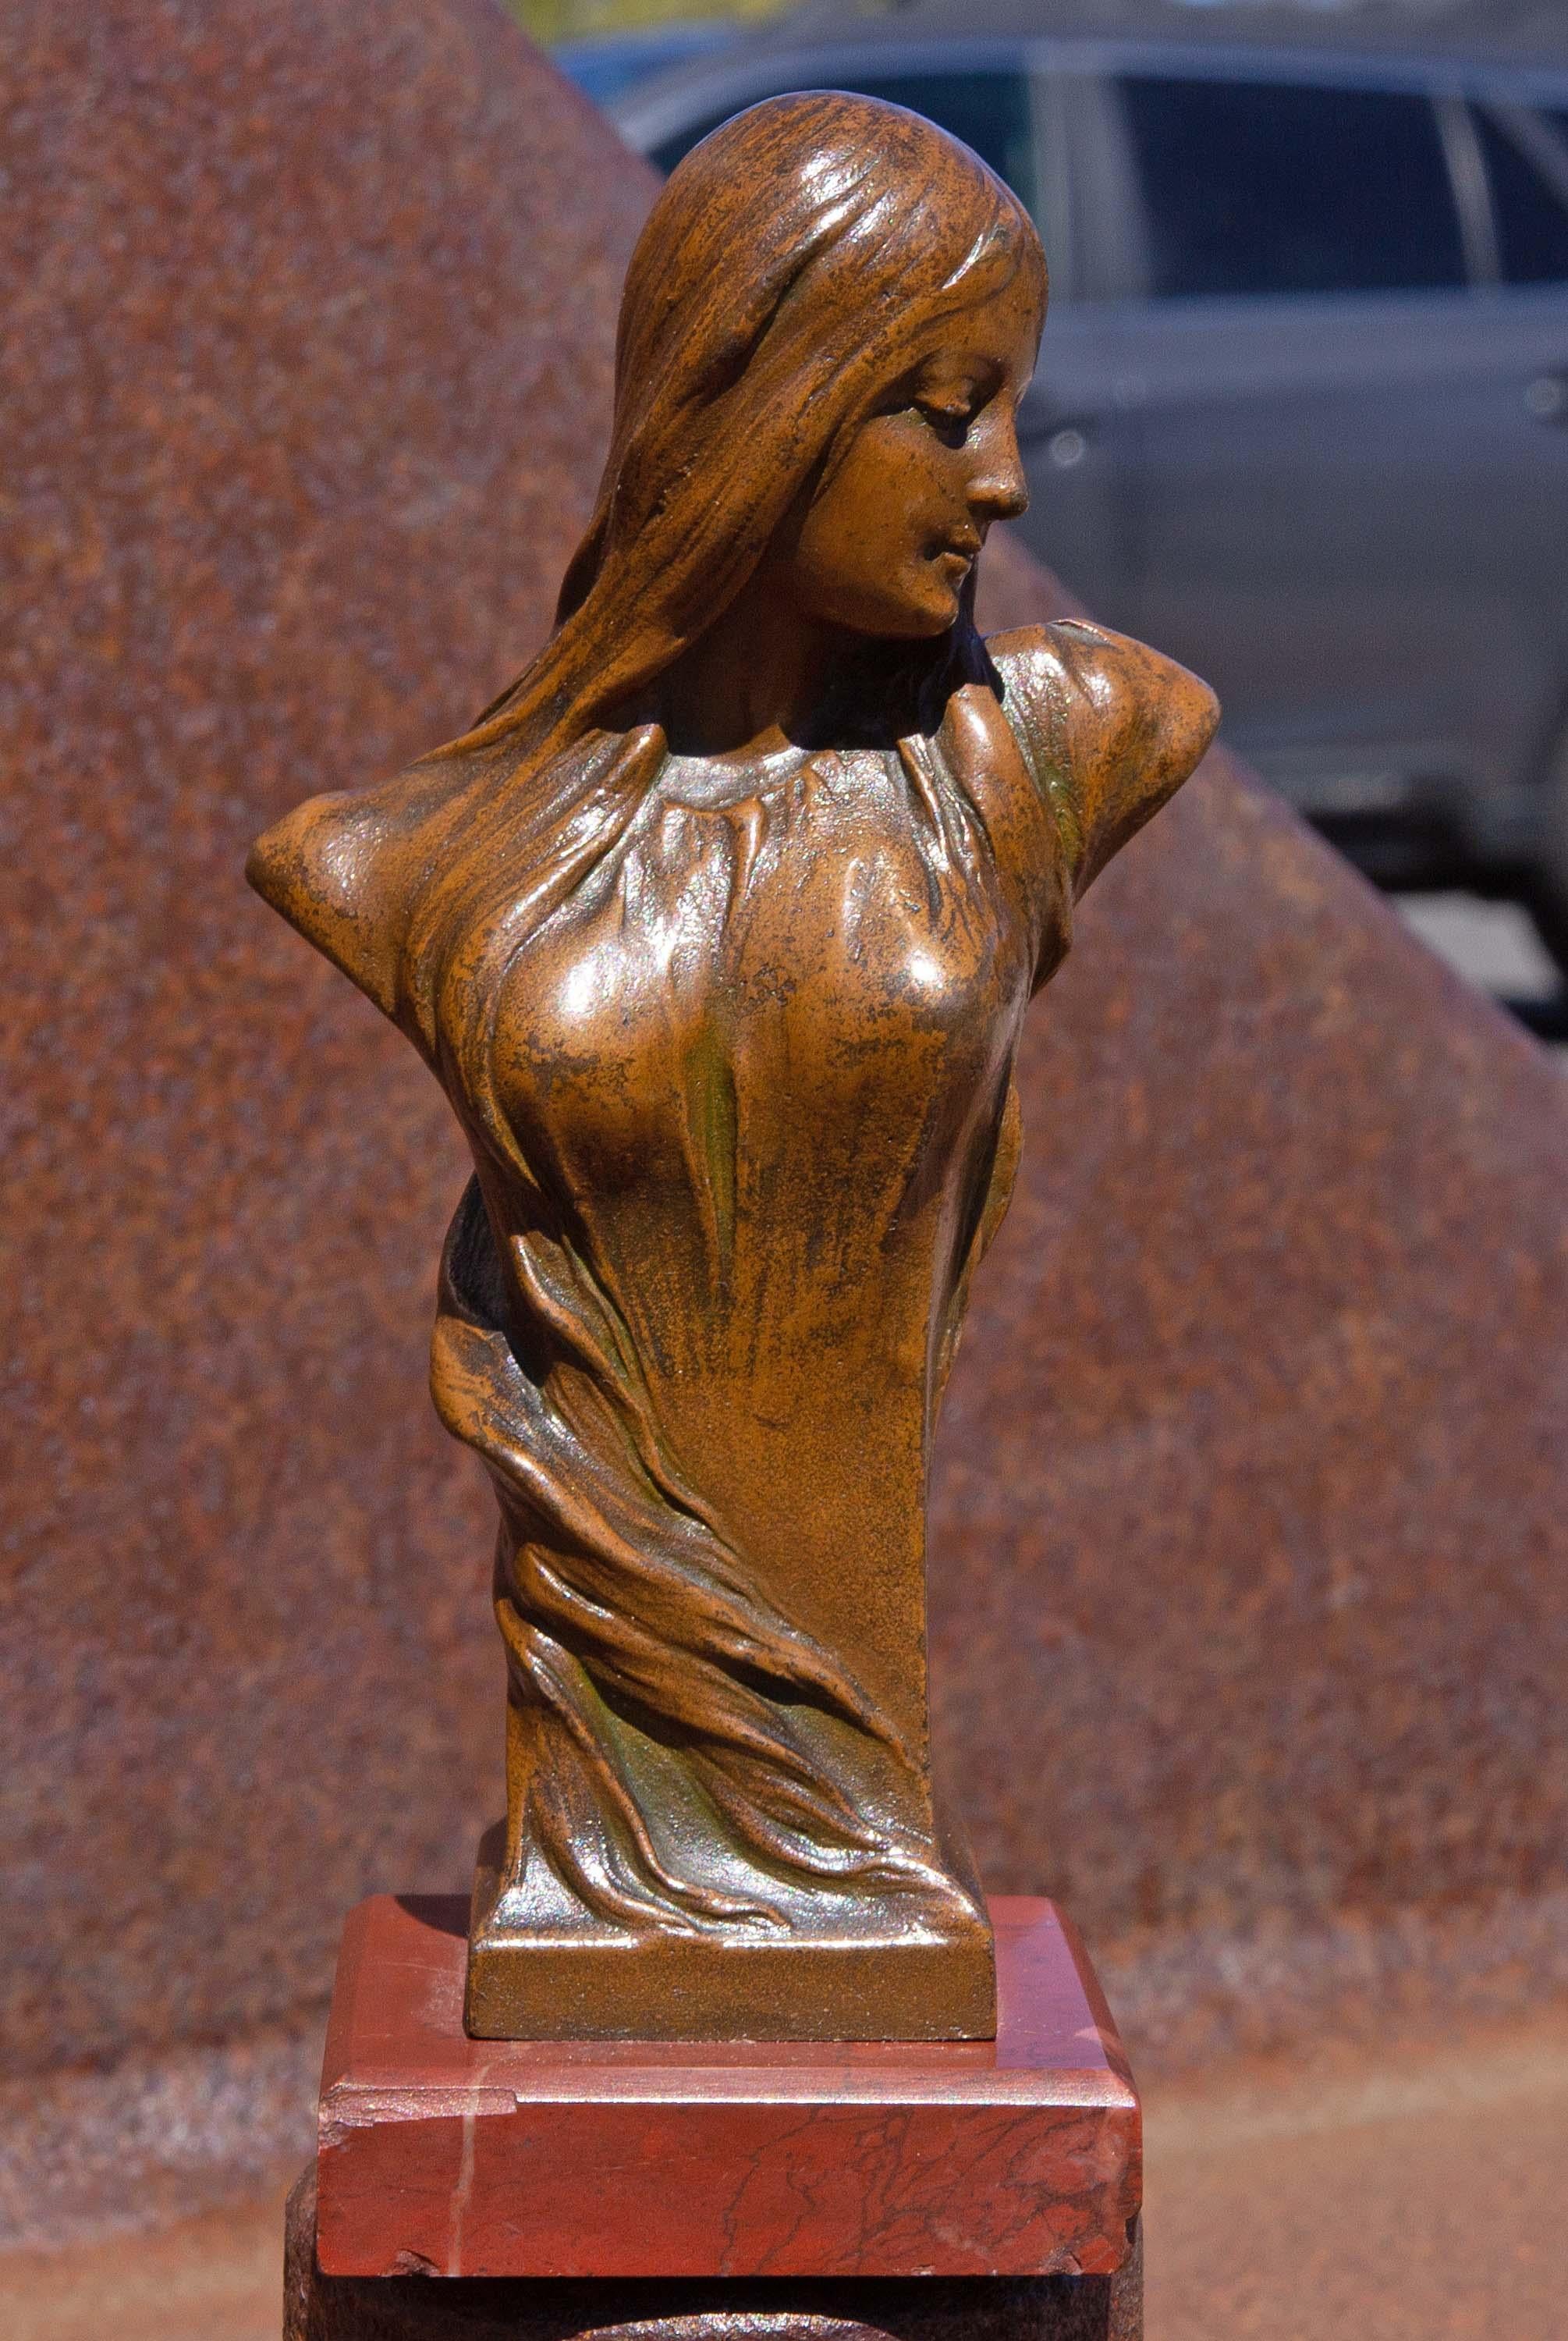 Bronze Art Nouveau sculpture of a young woman with flowing hair. Mounted on rouge marble base. Circa 1900. Measure: 4 3/4